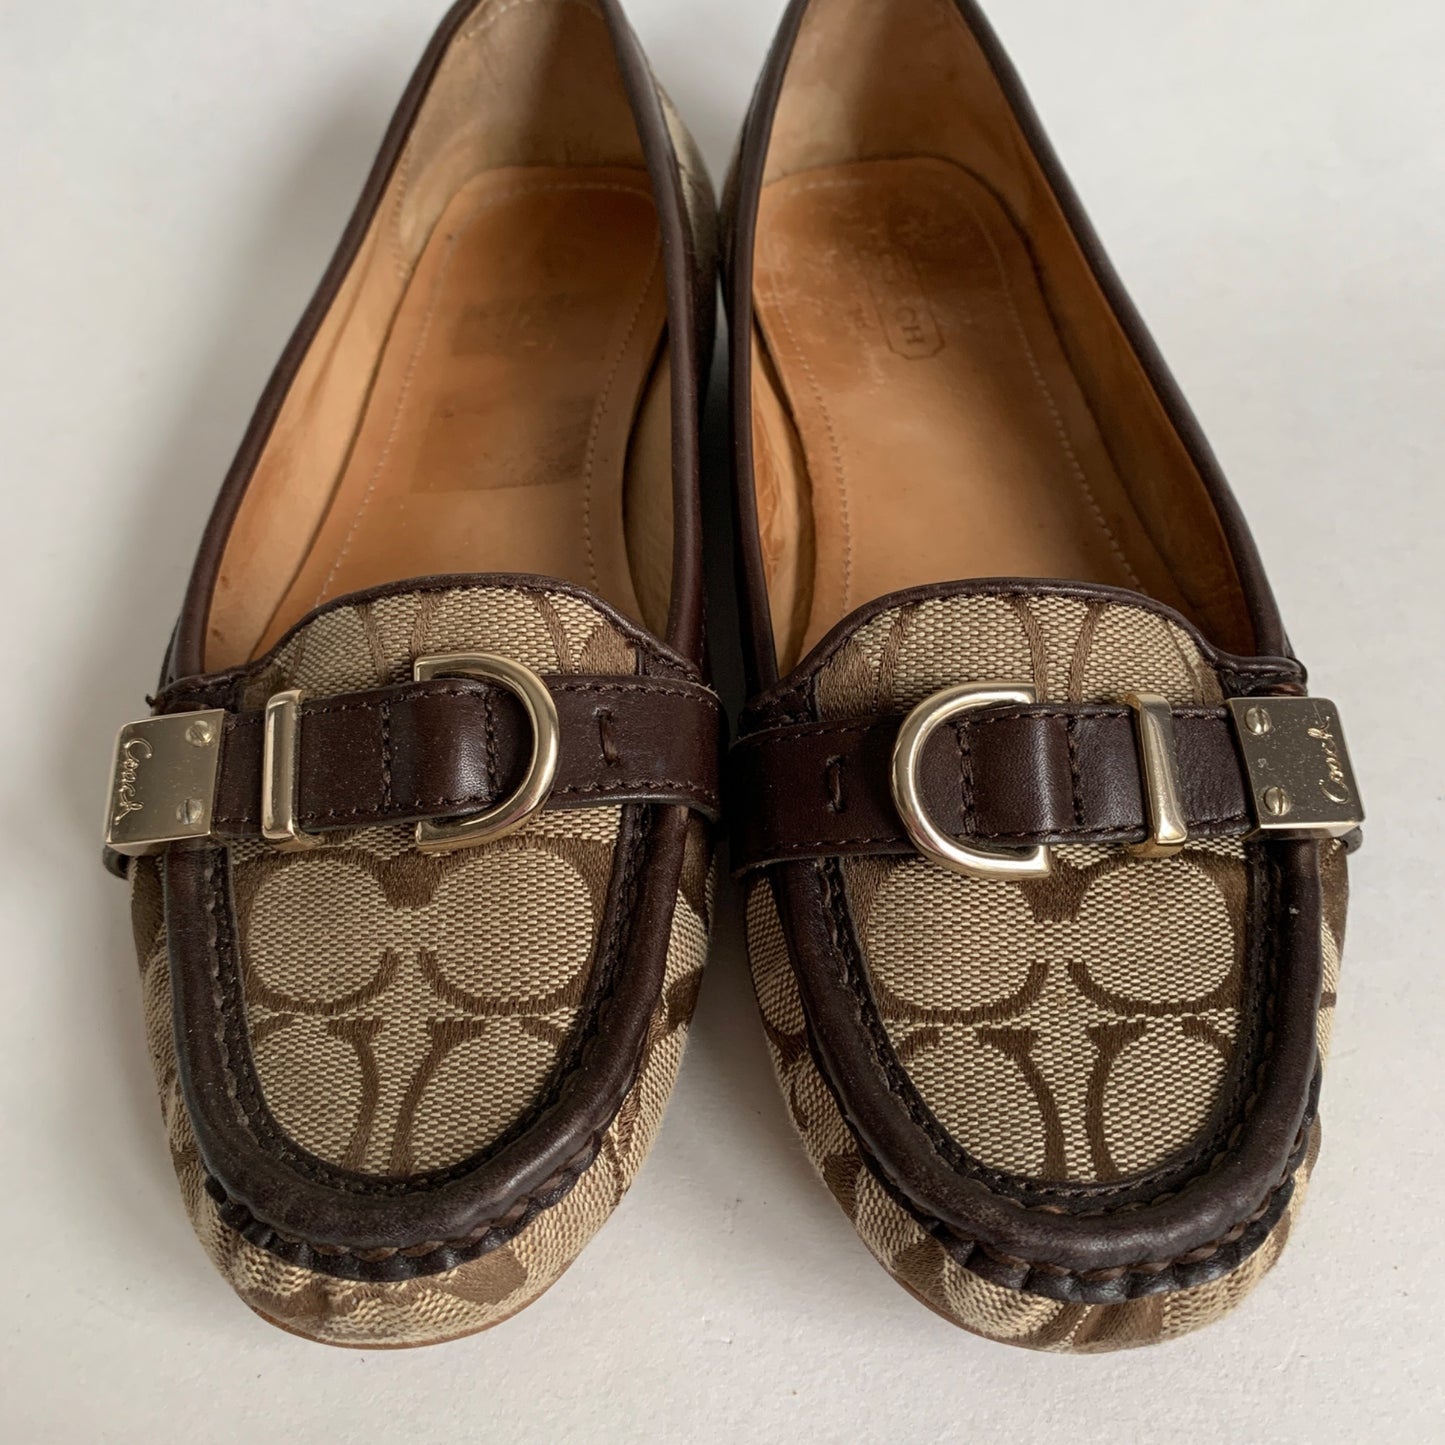 Coach Flores A2160 Signature C Brown Flats 7.5 M with Box